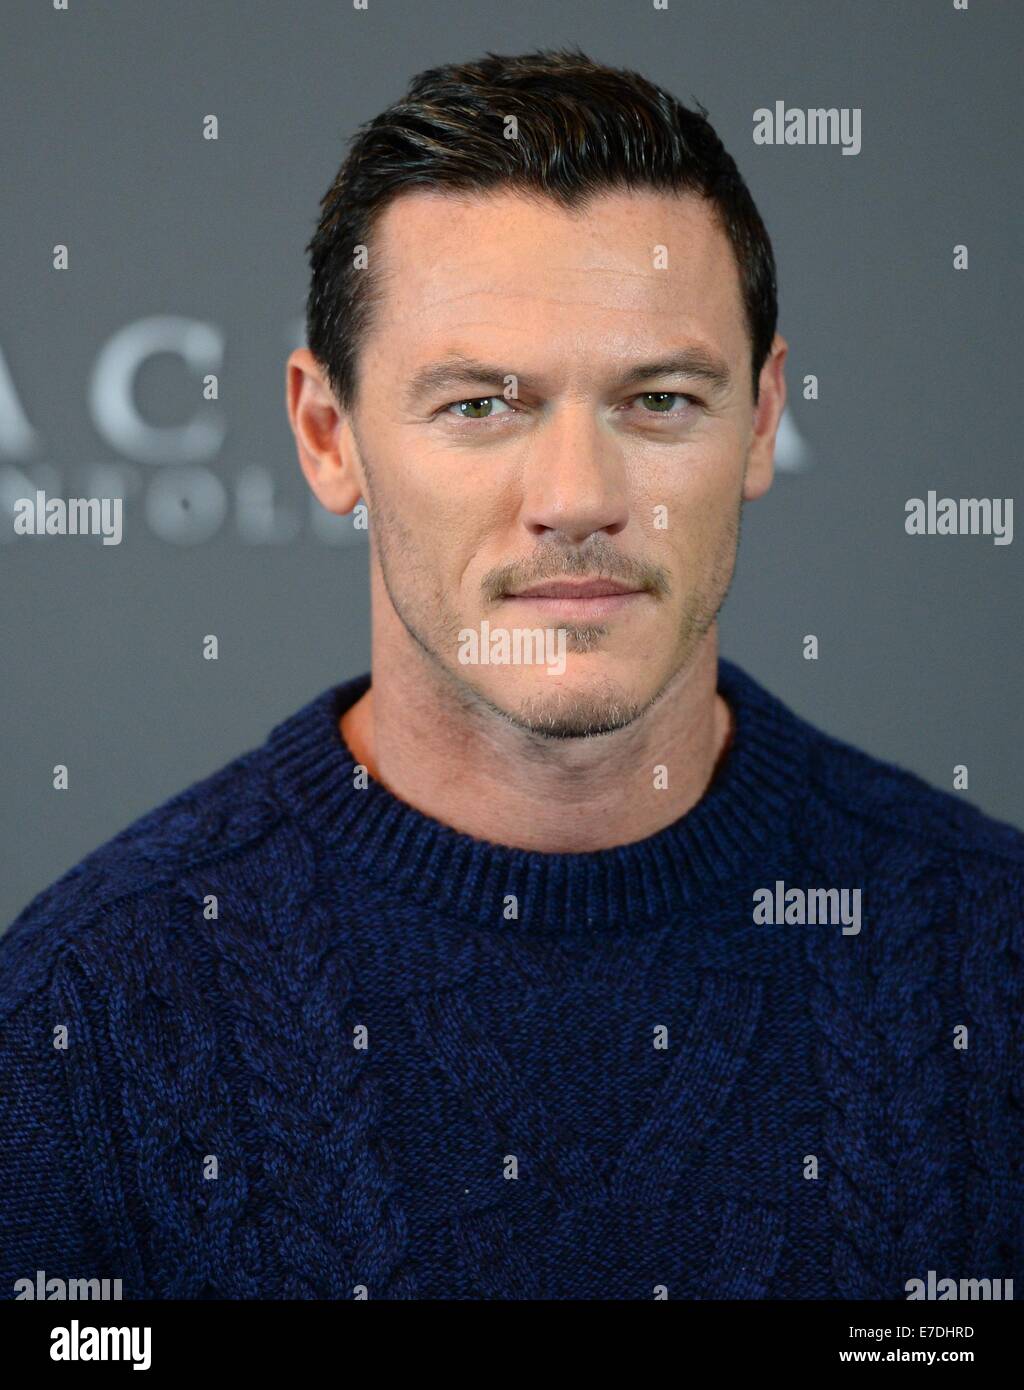 Berlin, Germany. 15th Sep, 2014. The British actor Luke Evans poses at a photocall for the movie 'Dracula Untold' in Berlin, Germany, 15 September 2014. The movie comes to the theaters on 02 October 2014. PHOTO: BRITTA PEDERSEN/DPA/Alamy Live News Stock Photo